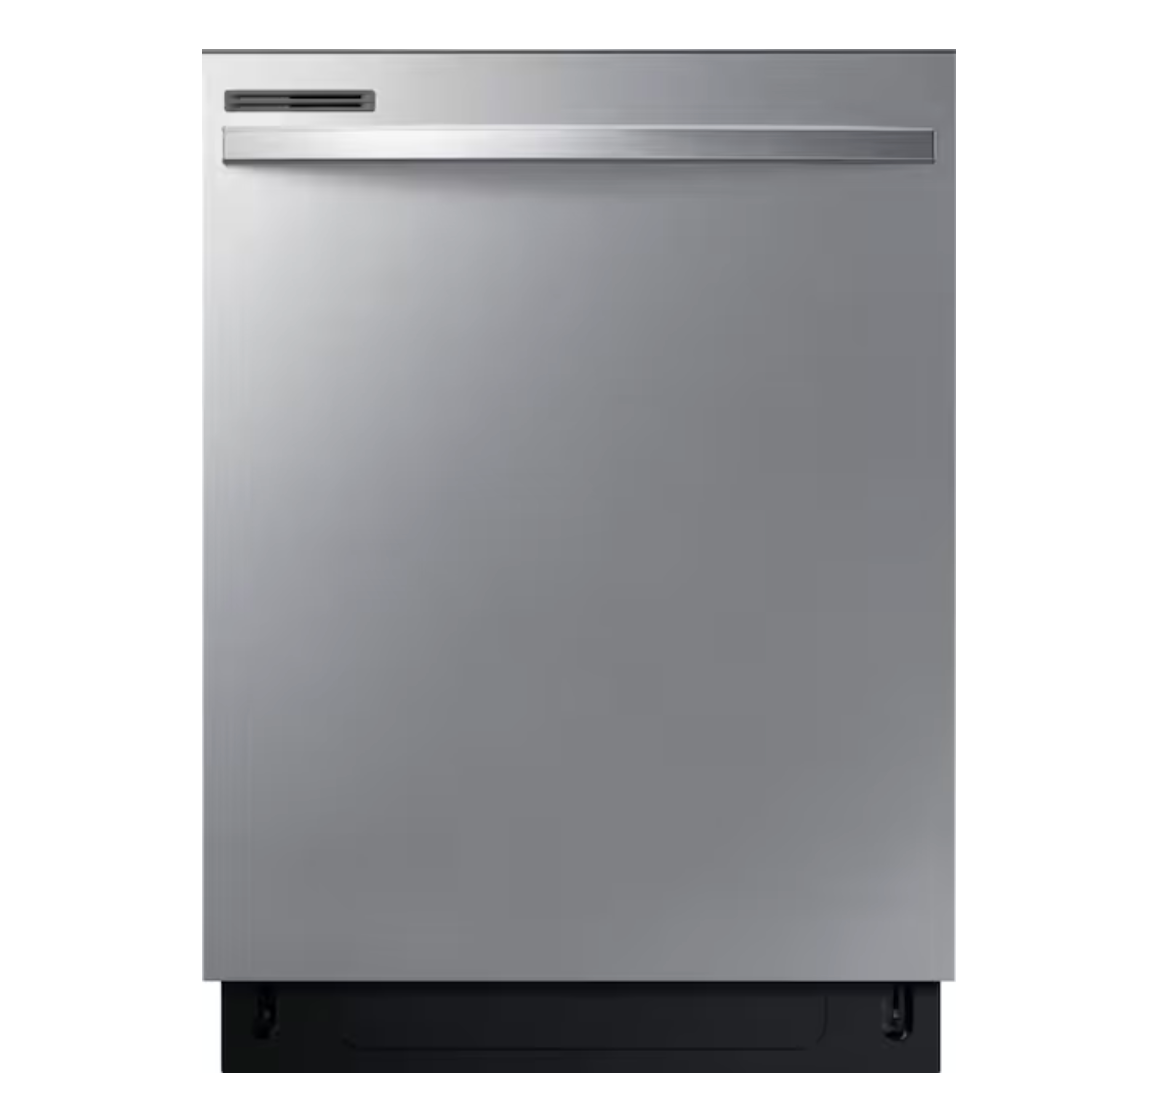 Samsung - 24" Top Control Built-In Dishwasher